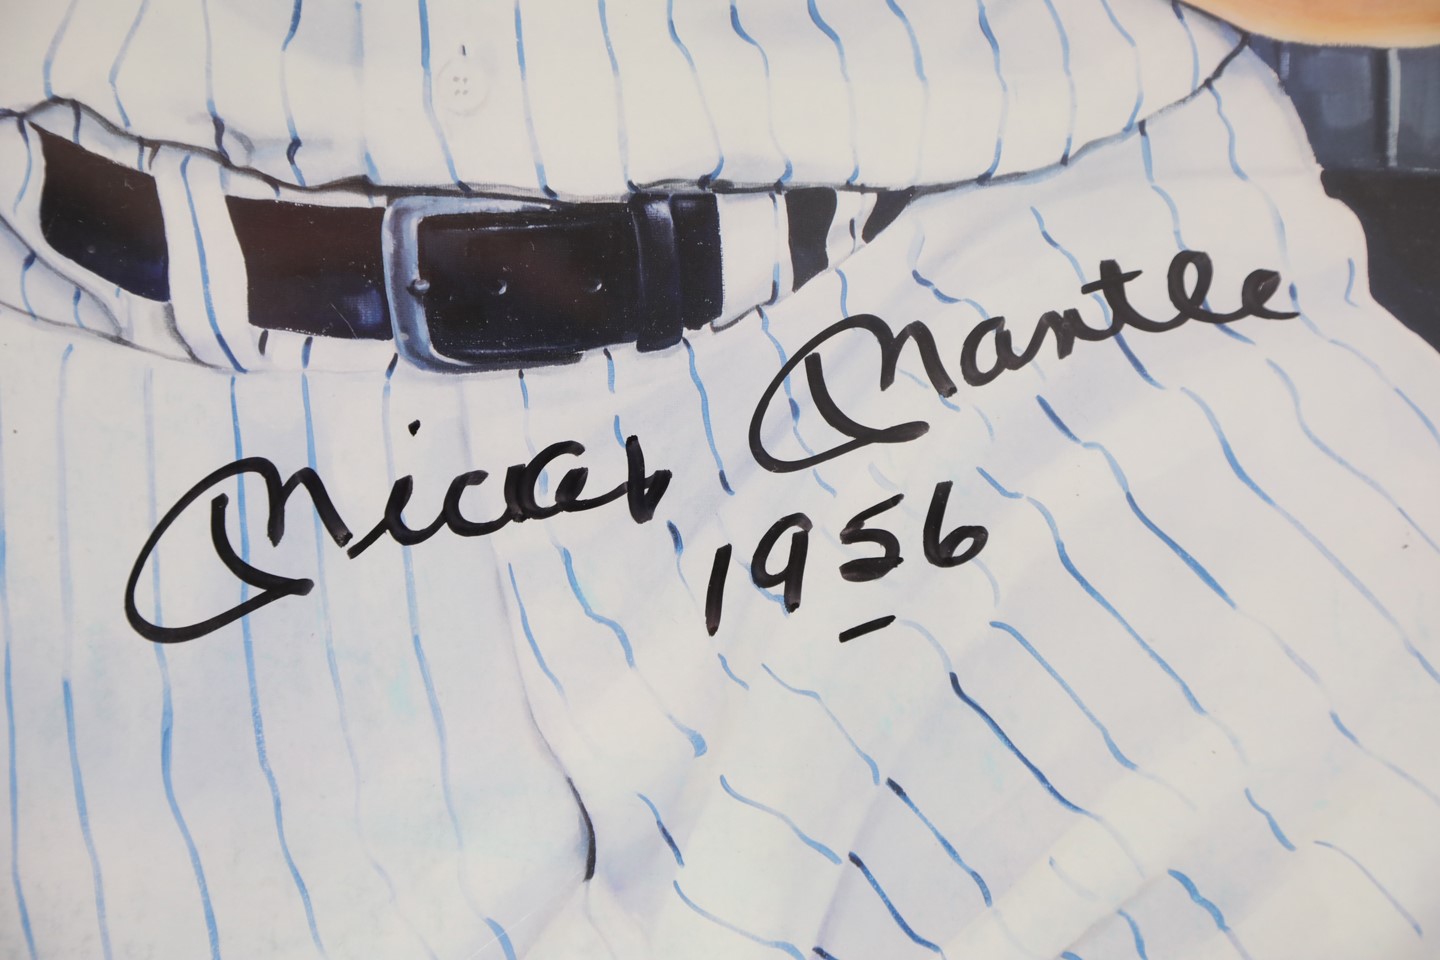 - Stunning Mickey Mantle "1956" Triple Crown Signed Poster from the Greer Johnson Estate (JSA)